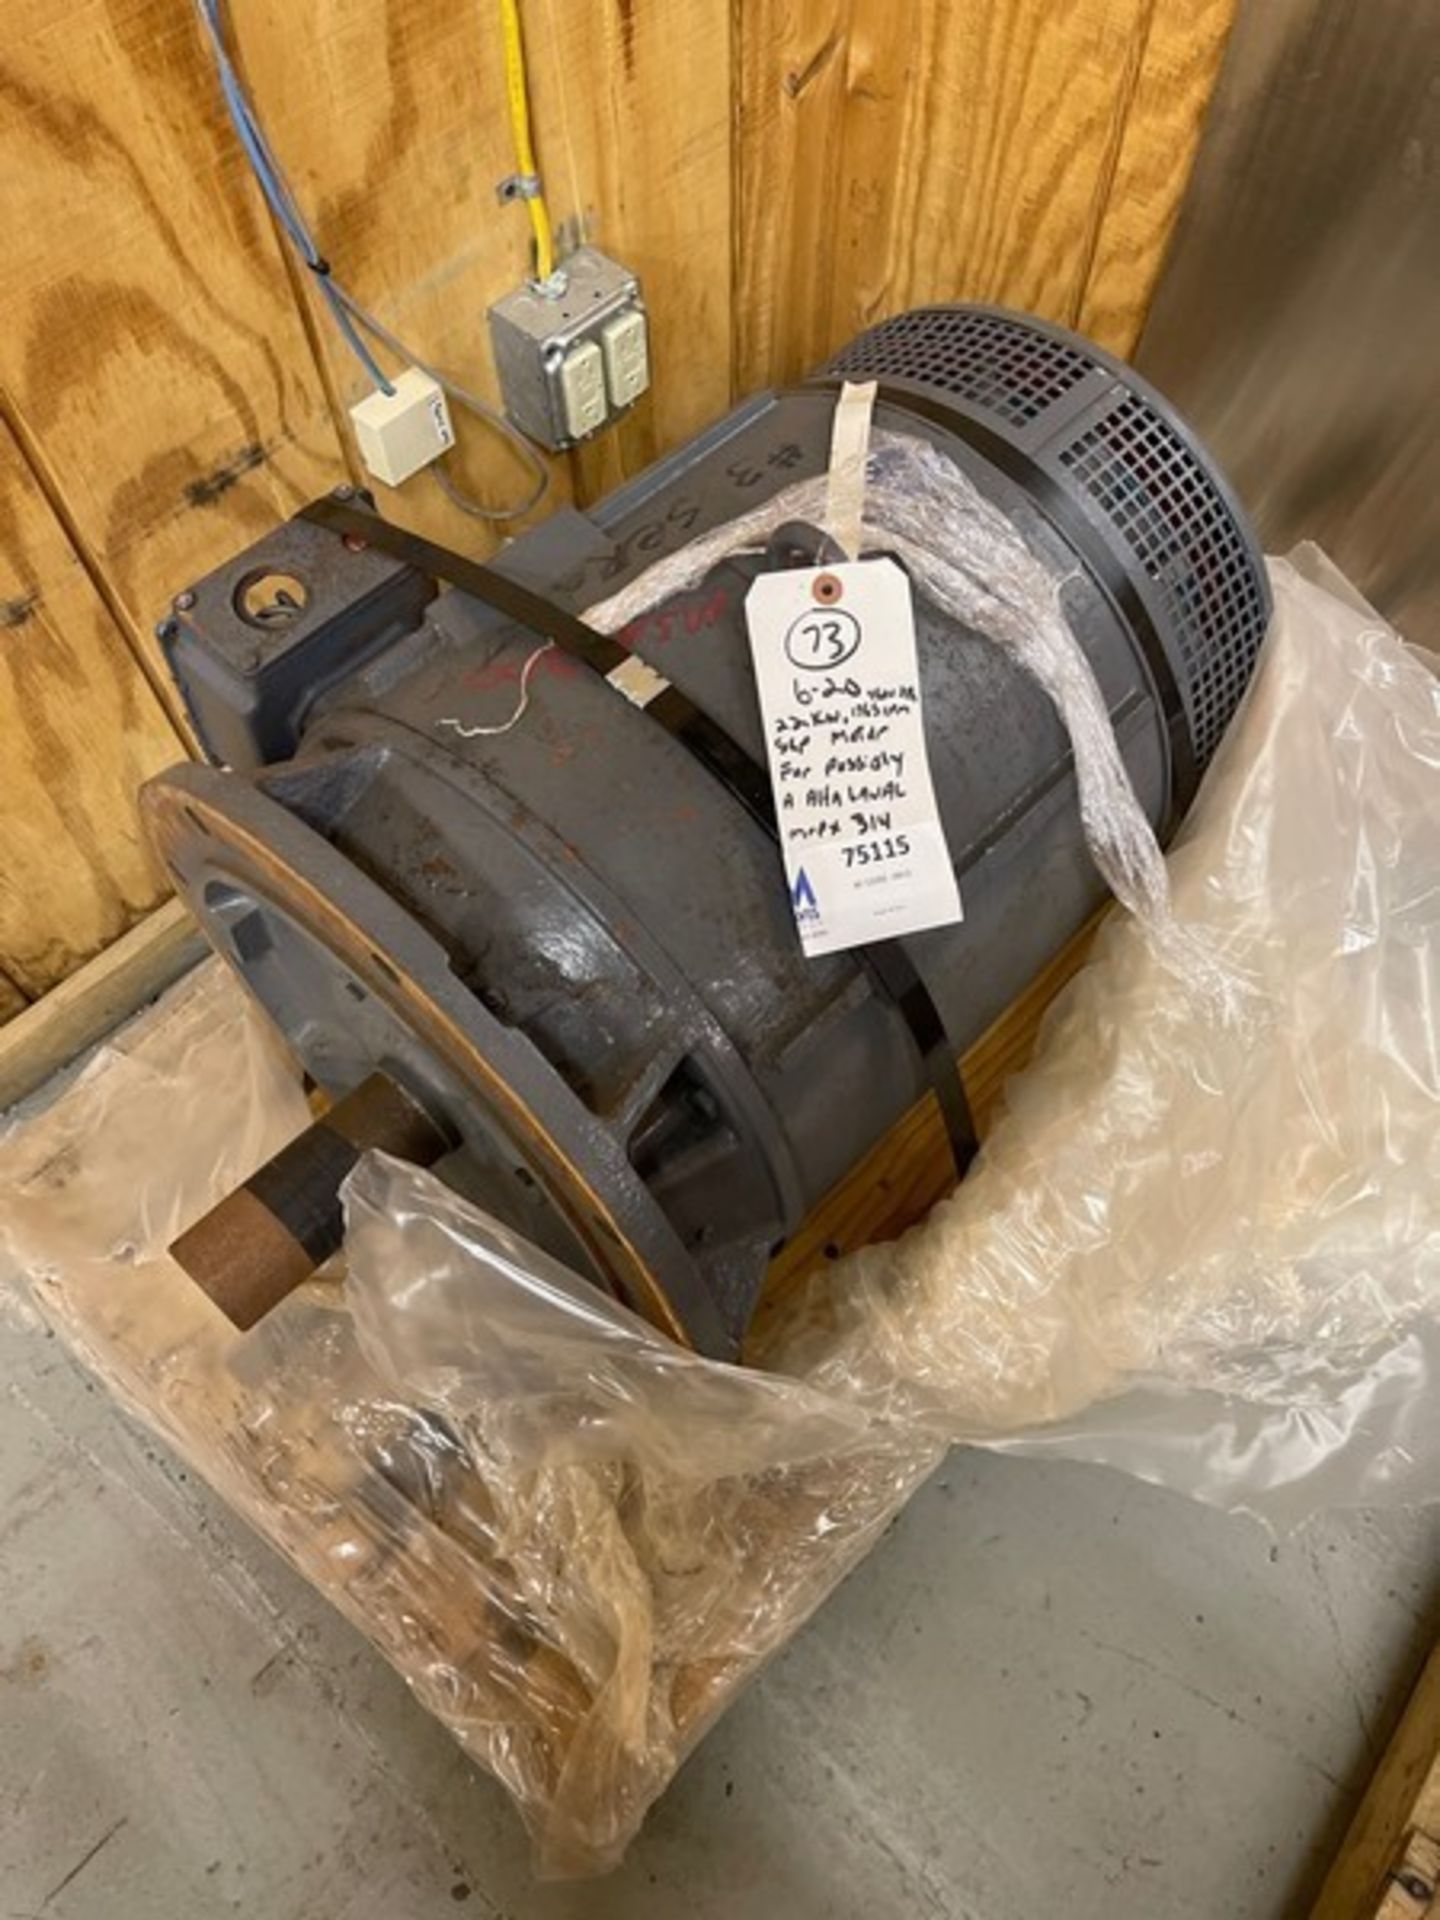 Brook 22 kw, (30 hp), Separator/Centrifuge Motor, 1765 rpm, 460 V 3 Phase, (Possibly for an Alfa